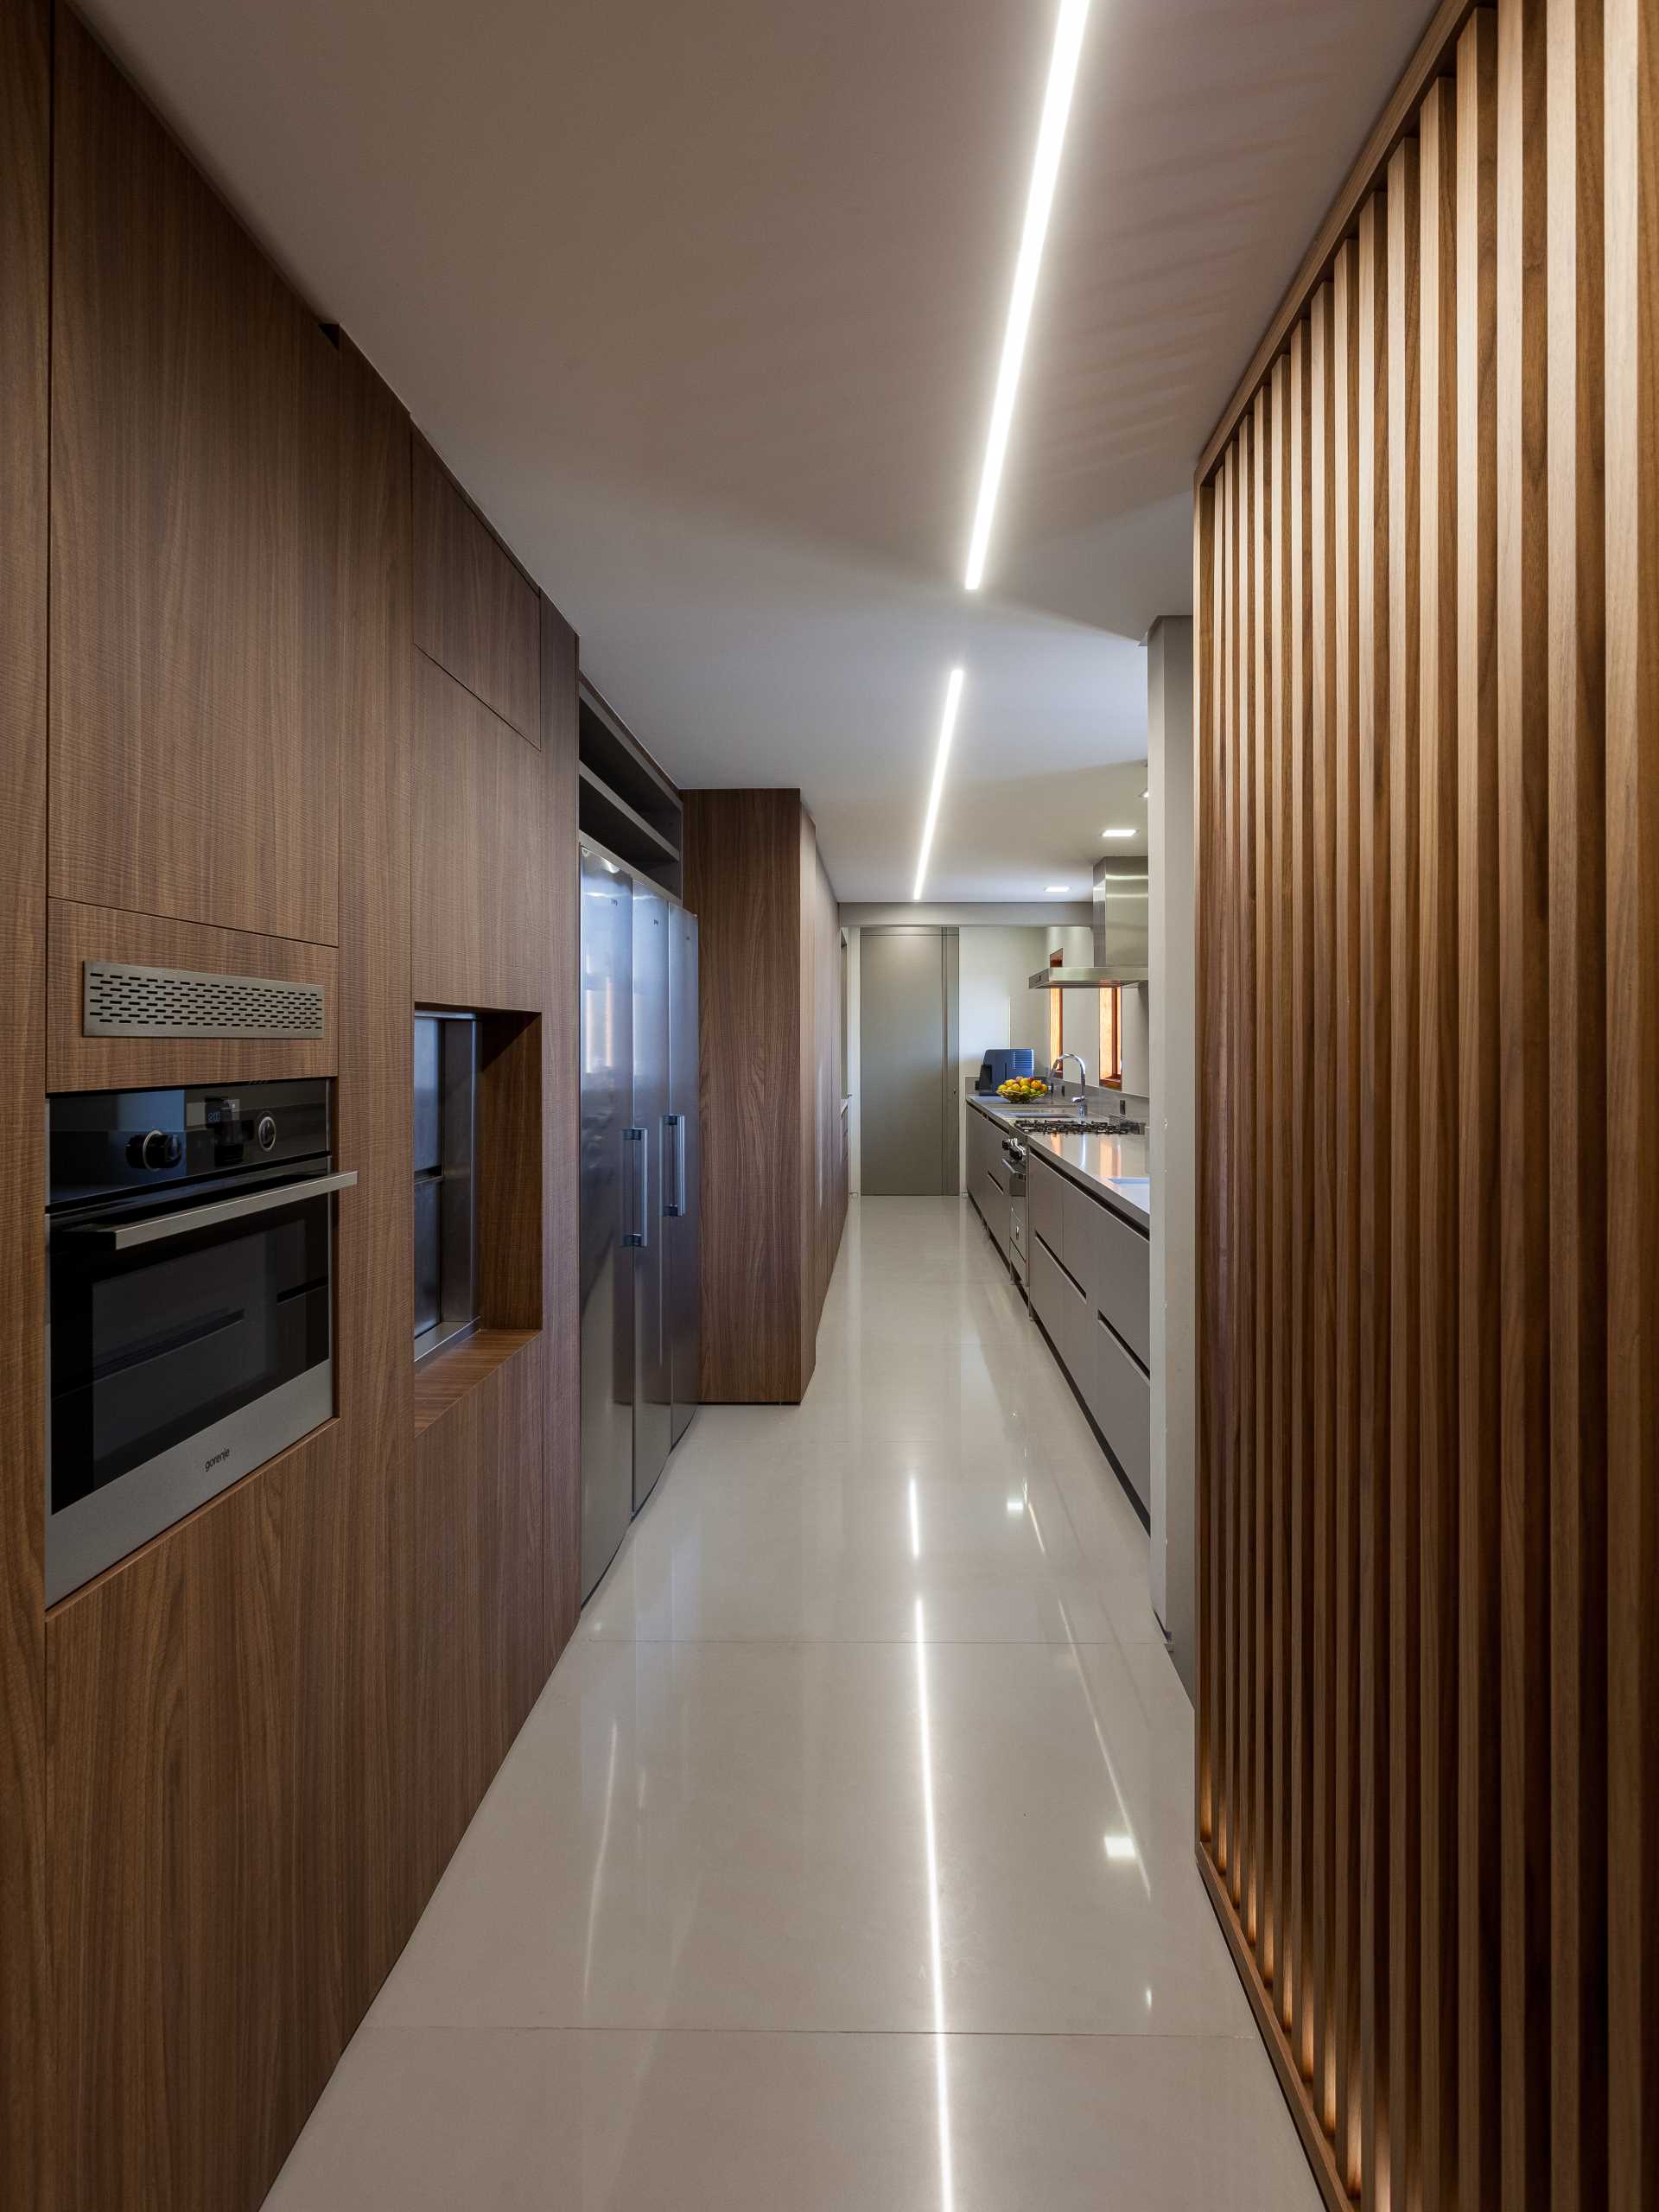 The longitudinal kitchen has been designed with a pass-through that connects it with the pantry and later with the dining room.